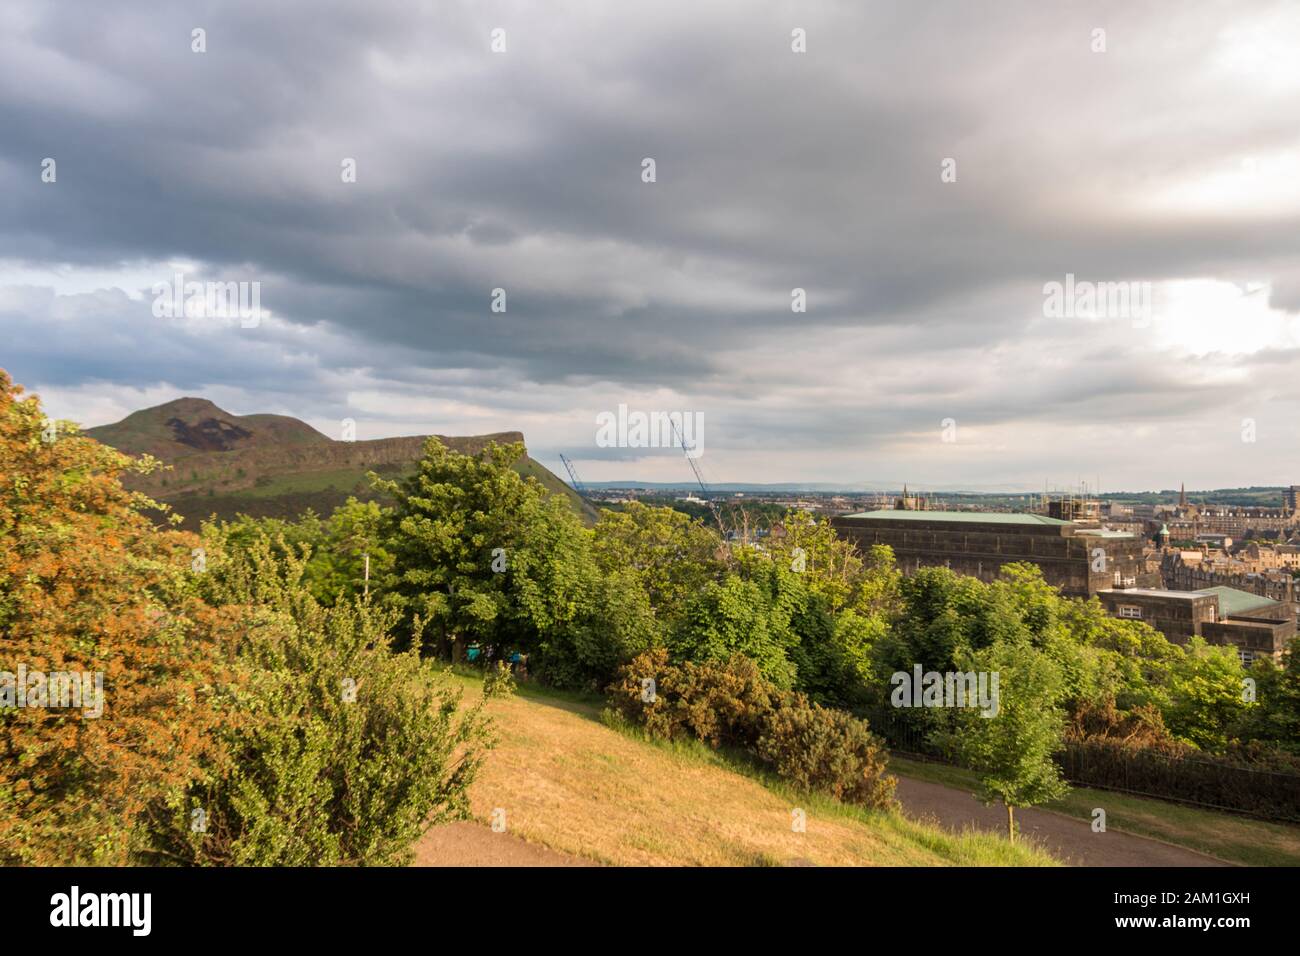 View of the city of Edinburgh from the mountain Stock Photo